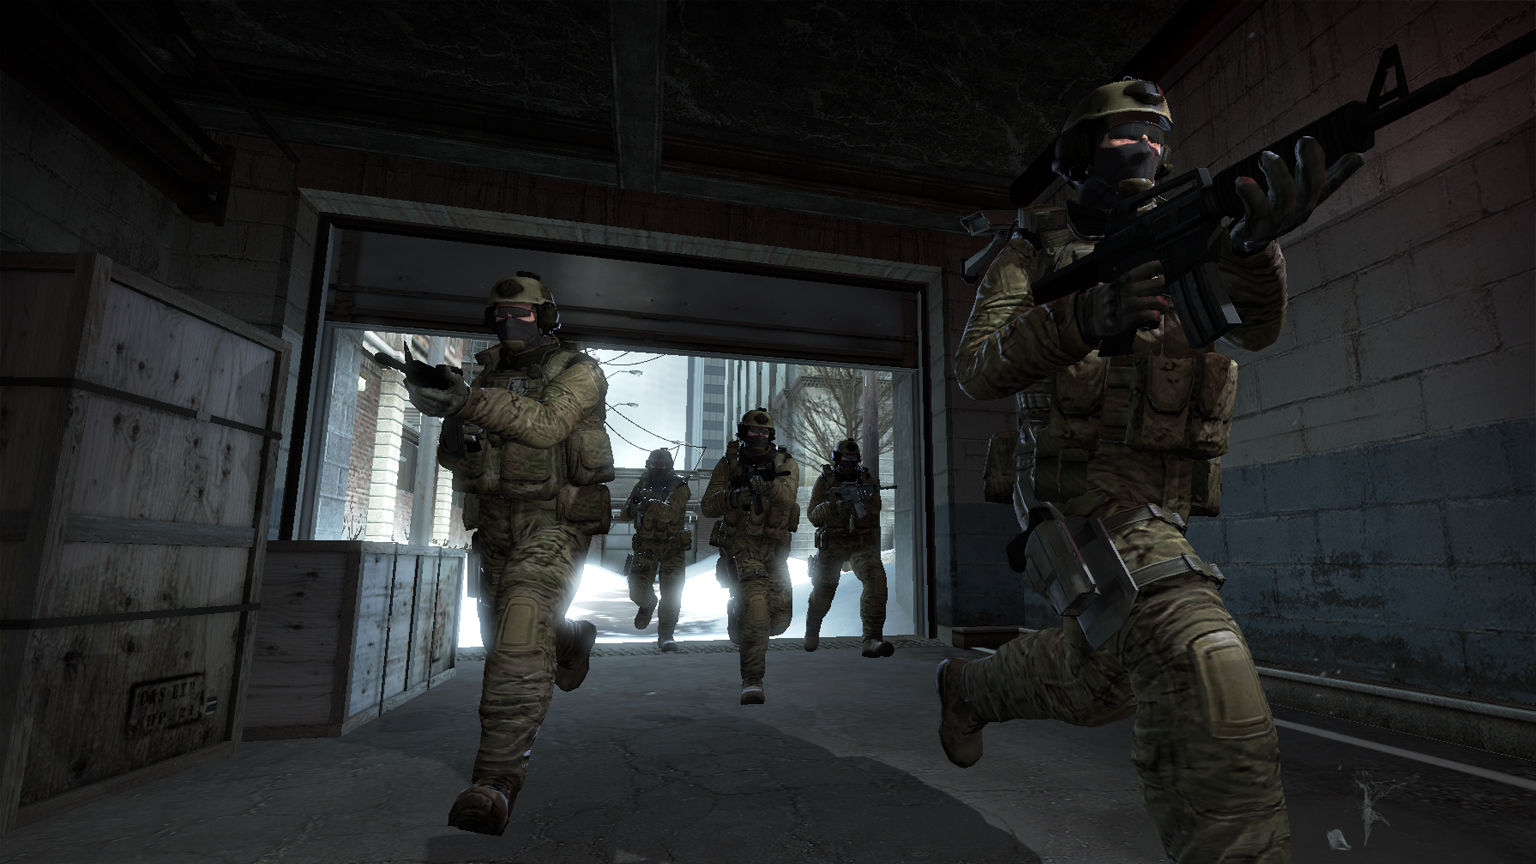 CS:GO Ps3 Gameplay - Counter-Strike: Global Offensive Arms Race on